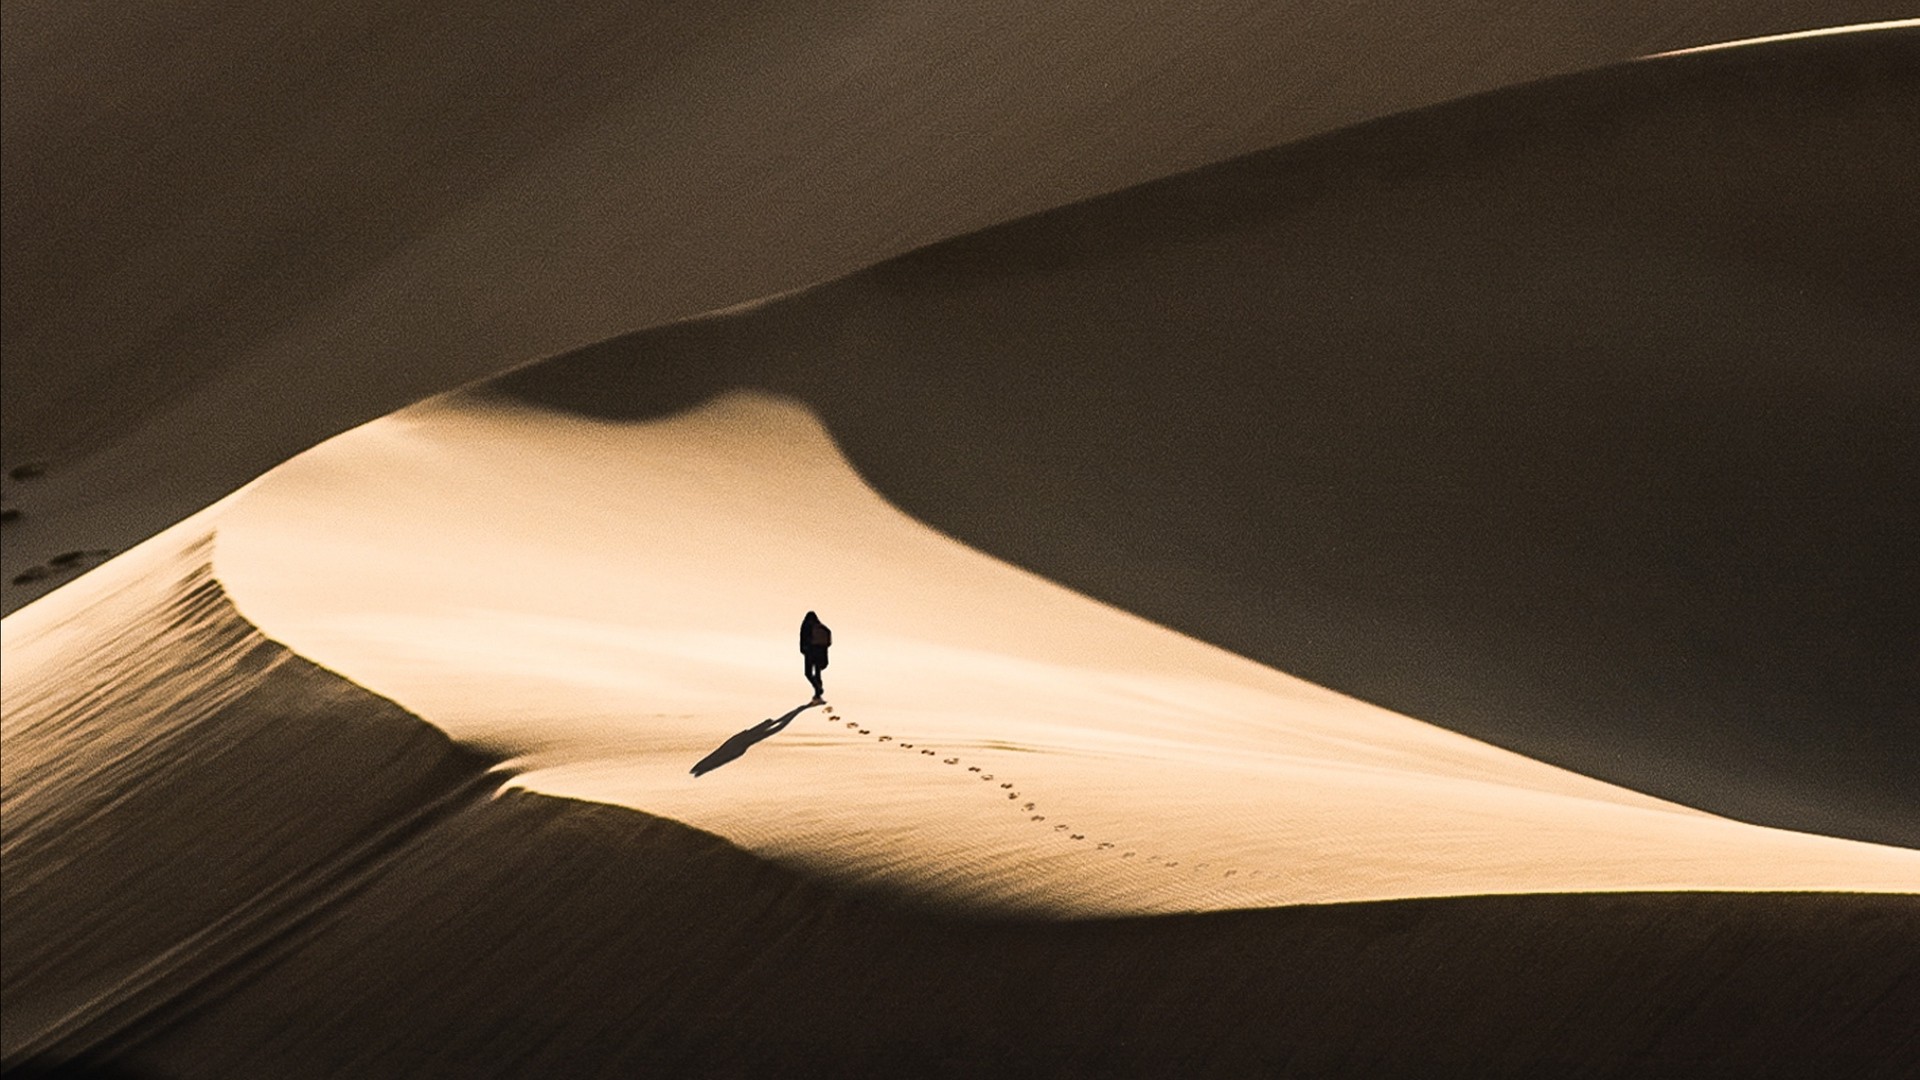 Desert, sand, silhouette, dunes, lonely, wanderer | picture, photo ...